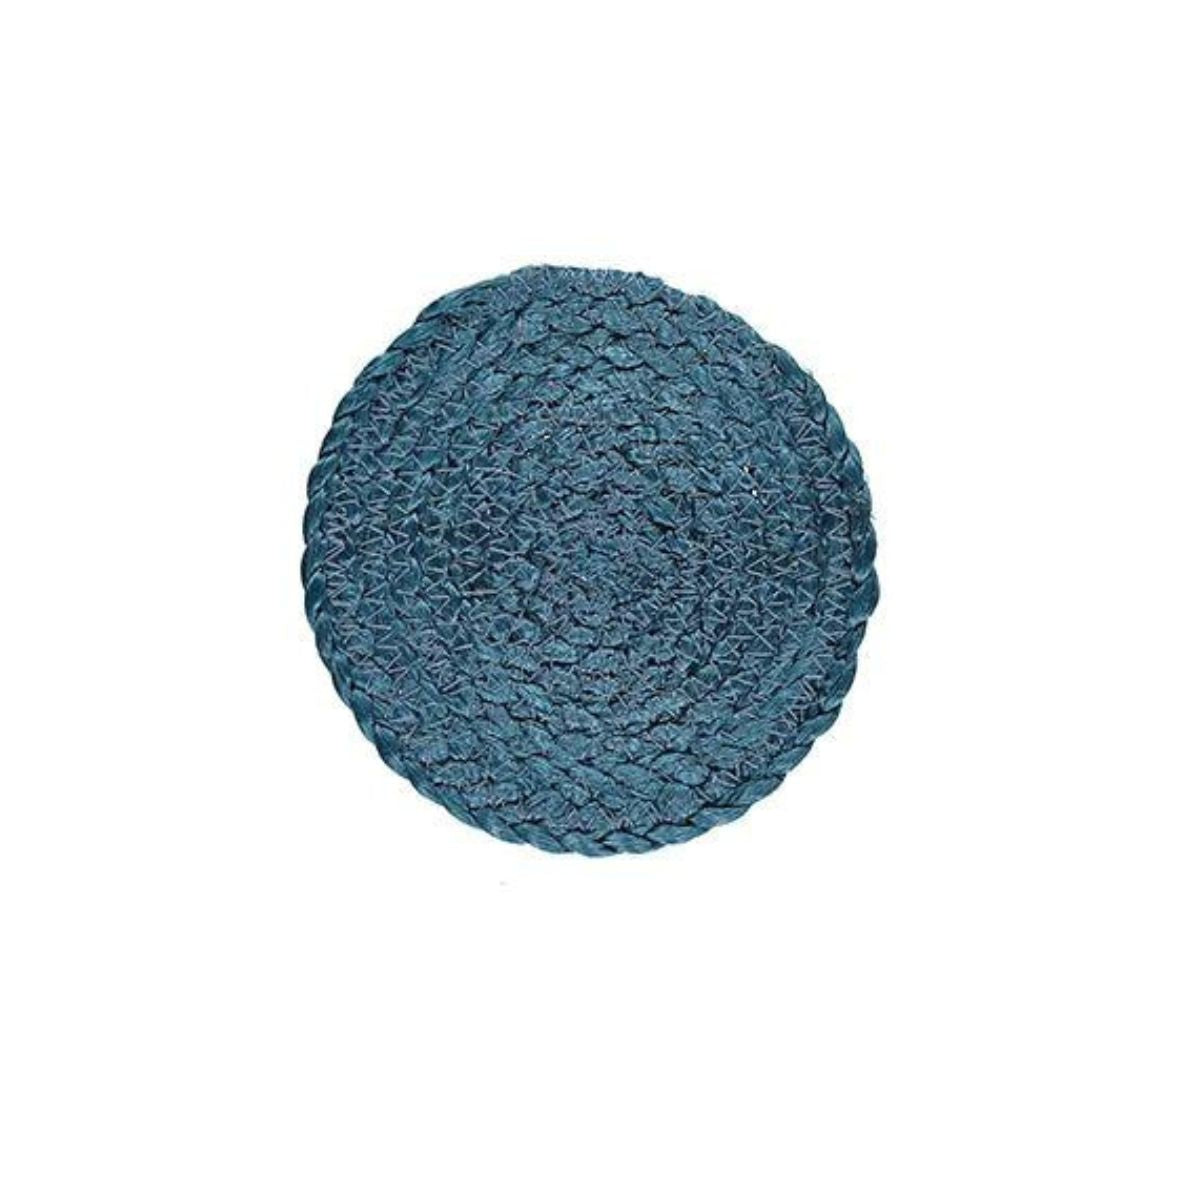 Handwoven Silky Jute Round Coasters, Set of 4